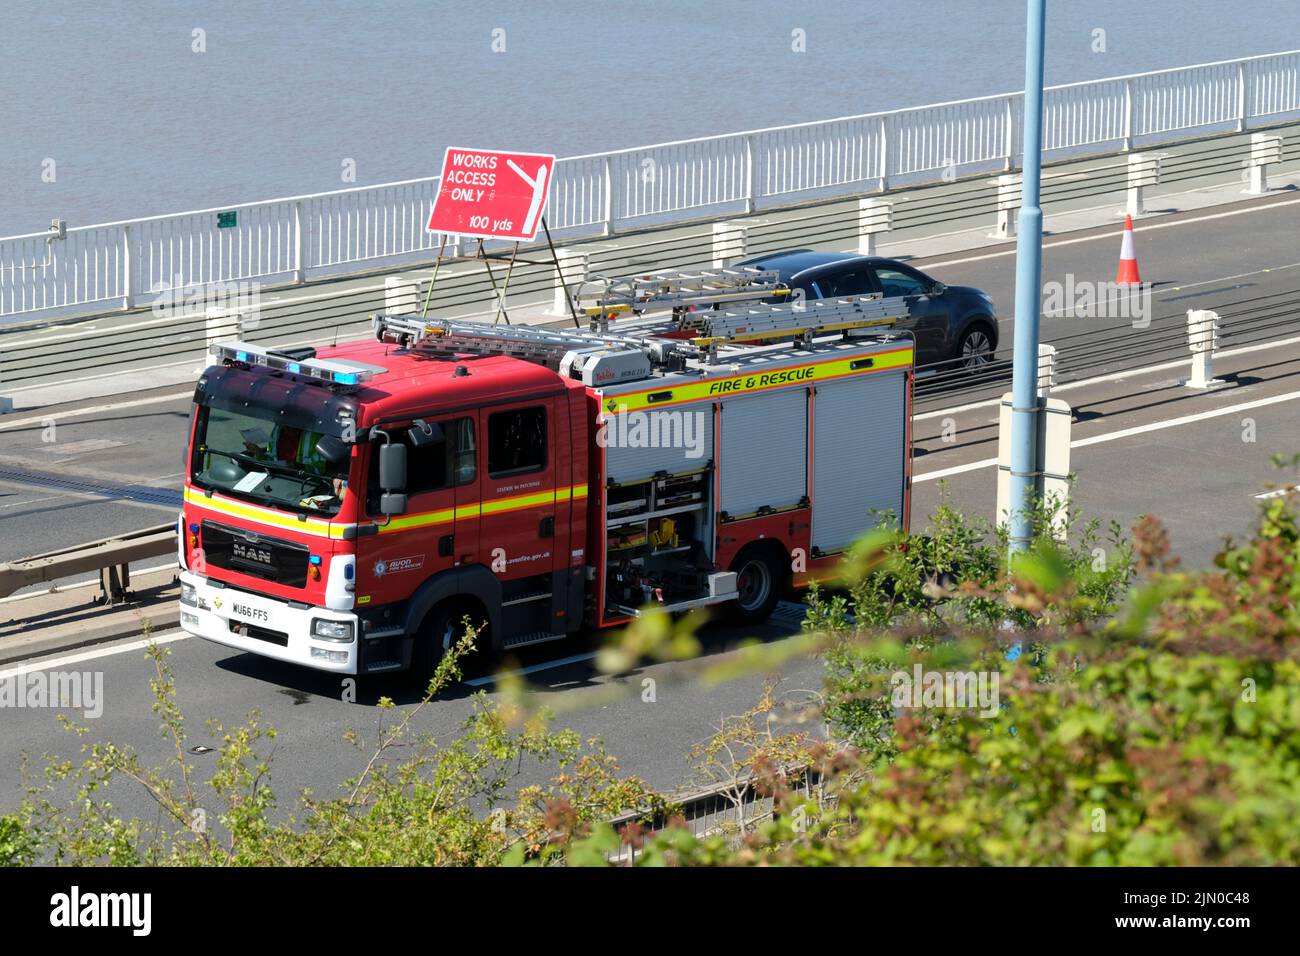 Bristol, UK. 8th Aug, 2022. A caravan has overturned on the eastbound carriageway of the M48 by the old Severn Bridge. Emergency services are in attendance and the carriageway is closed. Credit: JMF News/Alamy Live News Stock Photo